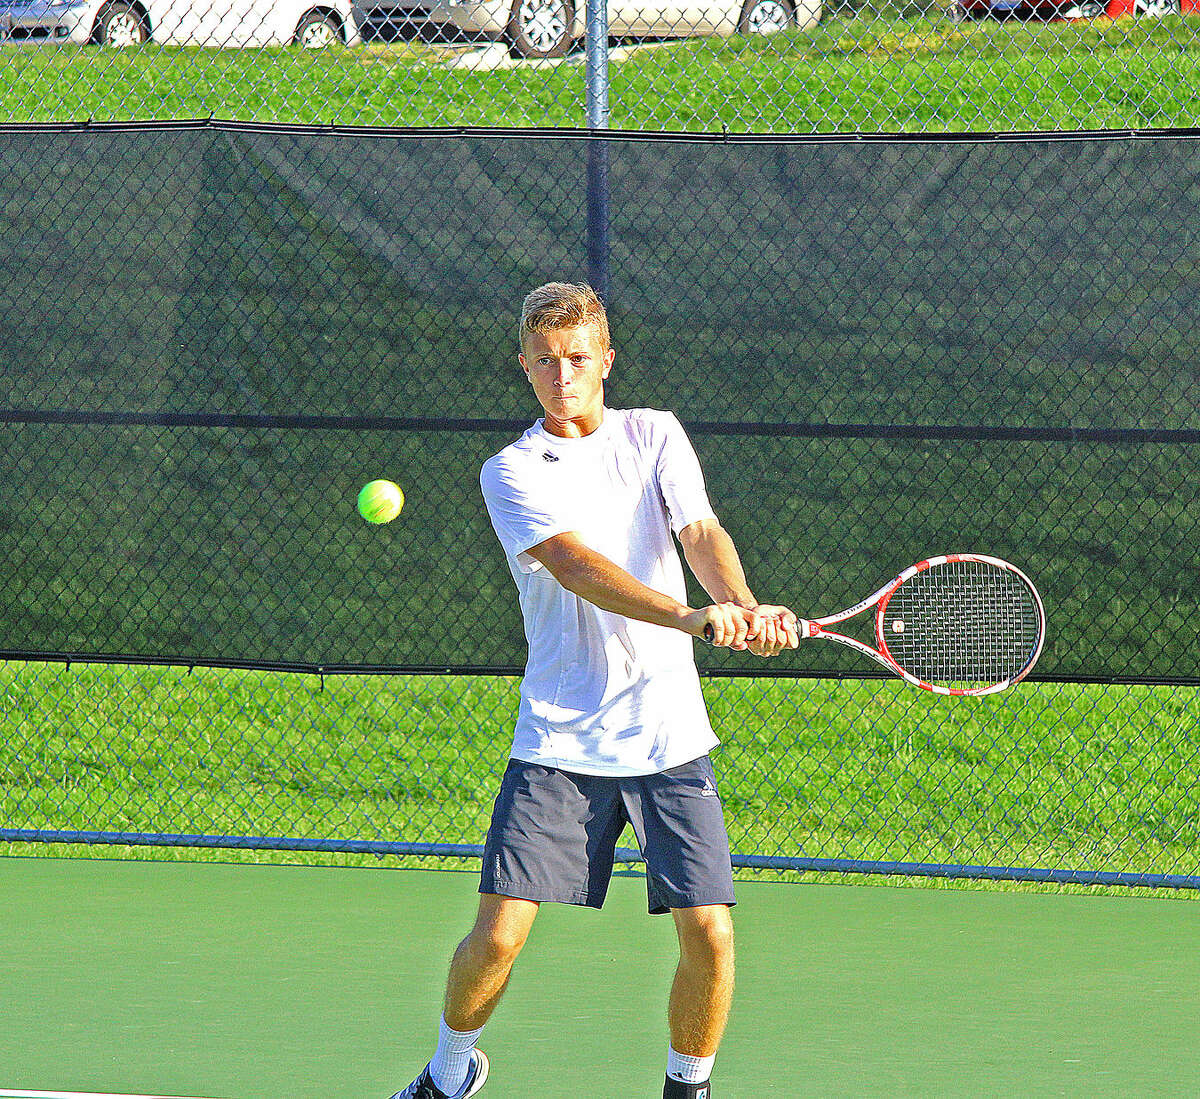 Former Edwardsville player Jack Desse, a freshman at SIUE, returns a shot Friday during a doubles match at SIUE Fall Invitational.